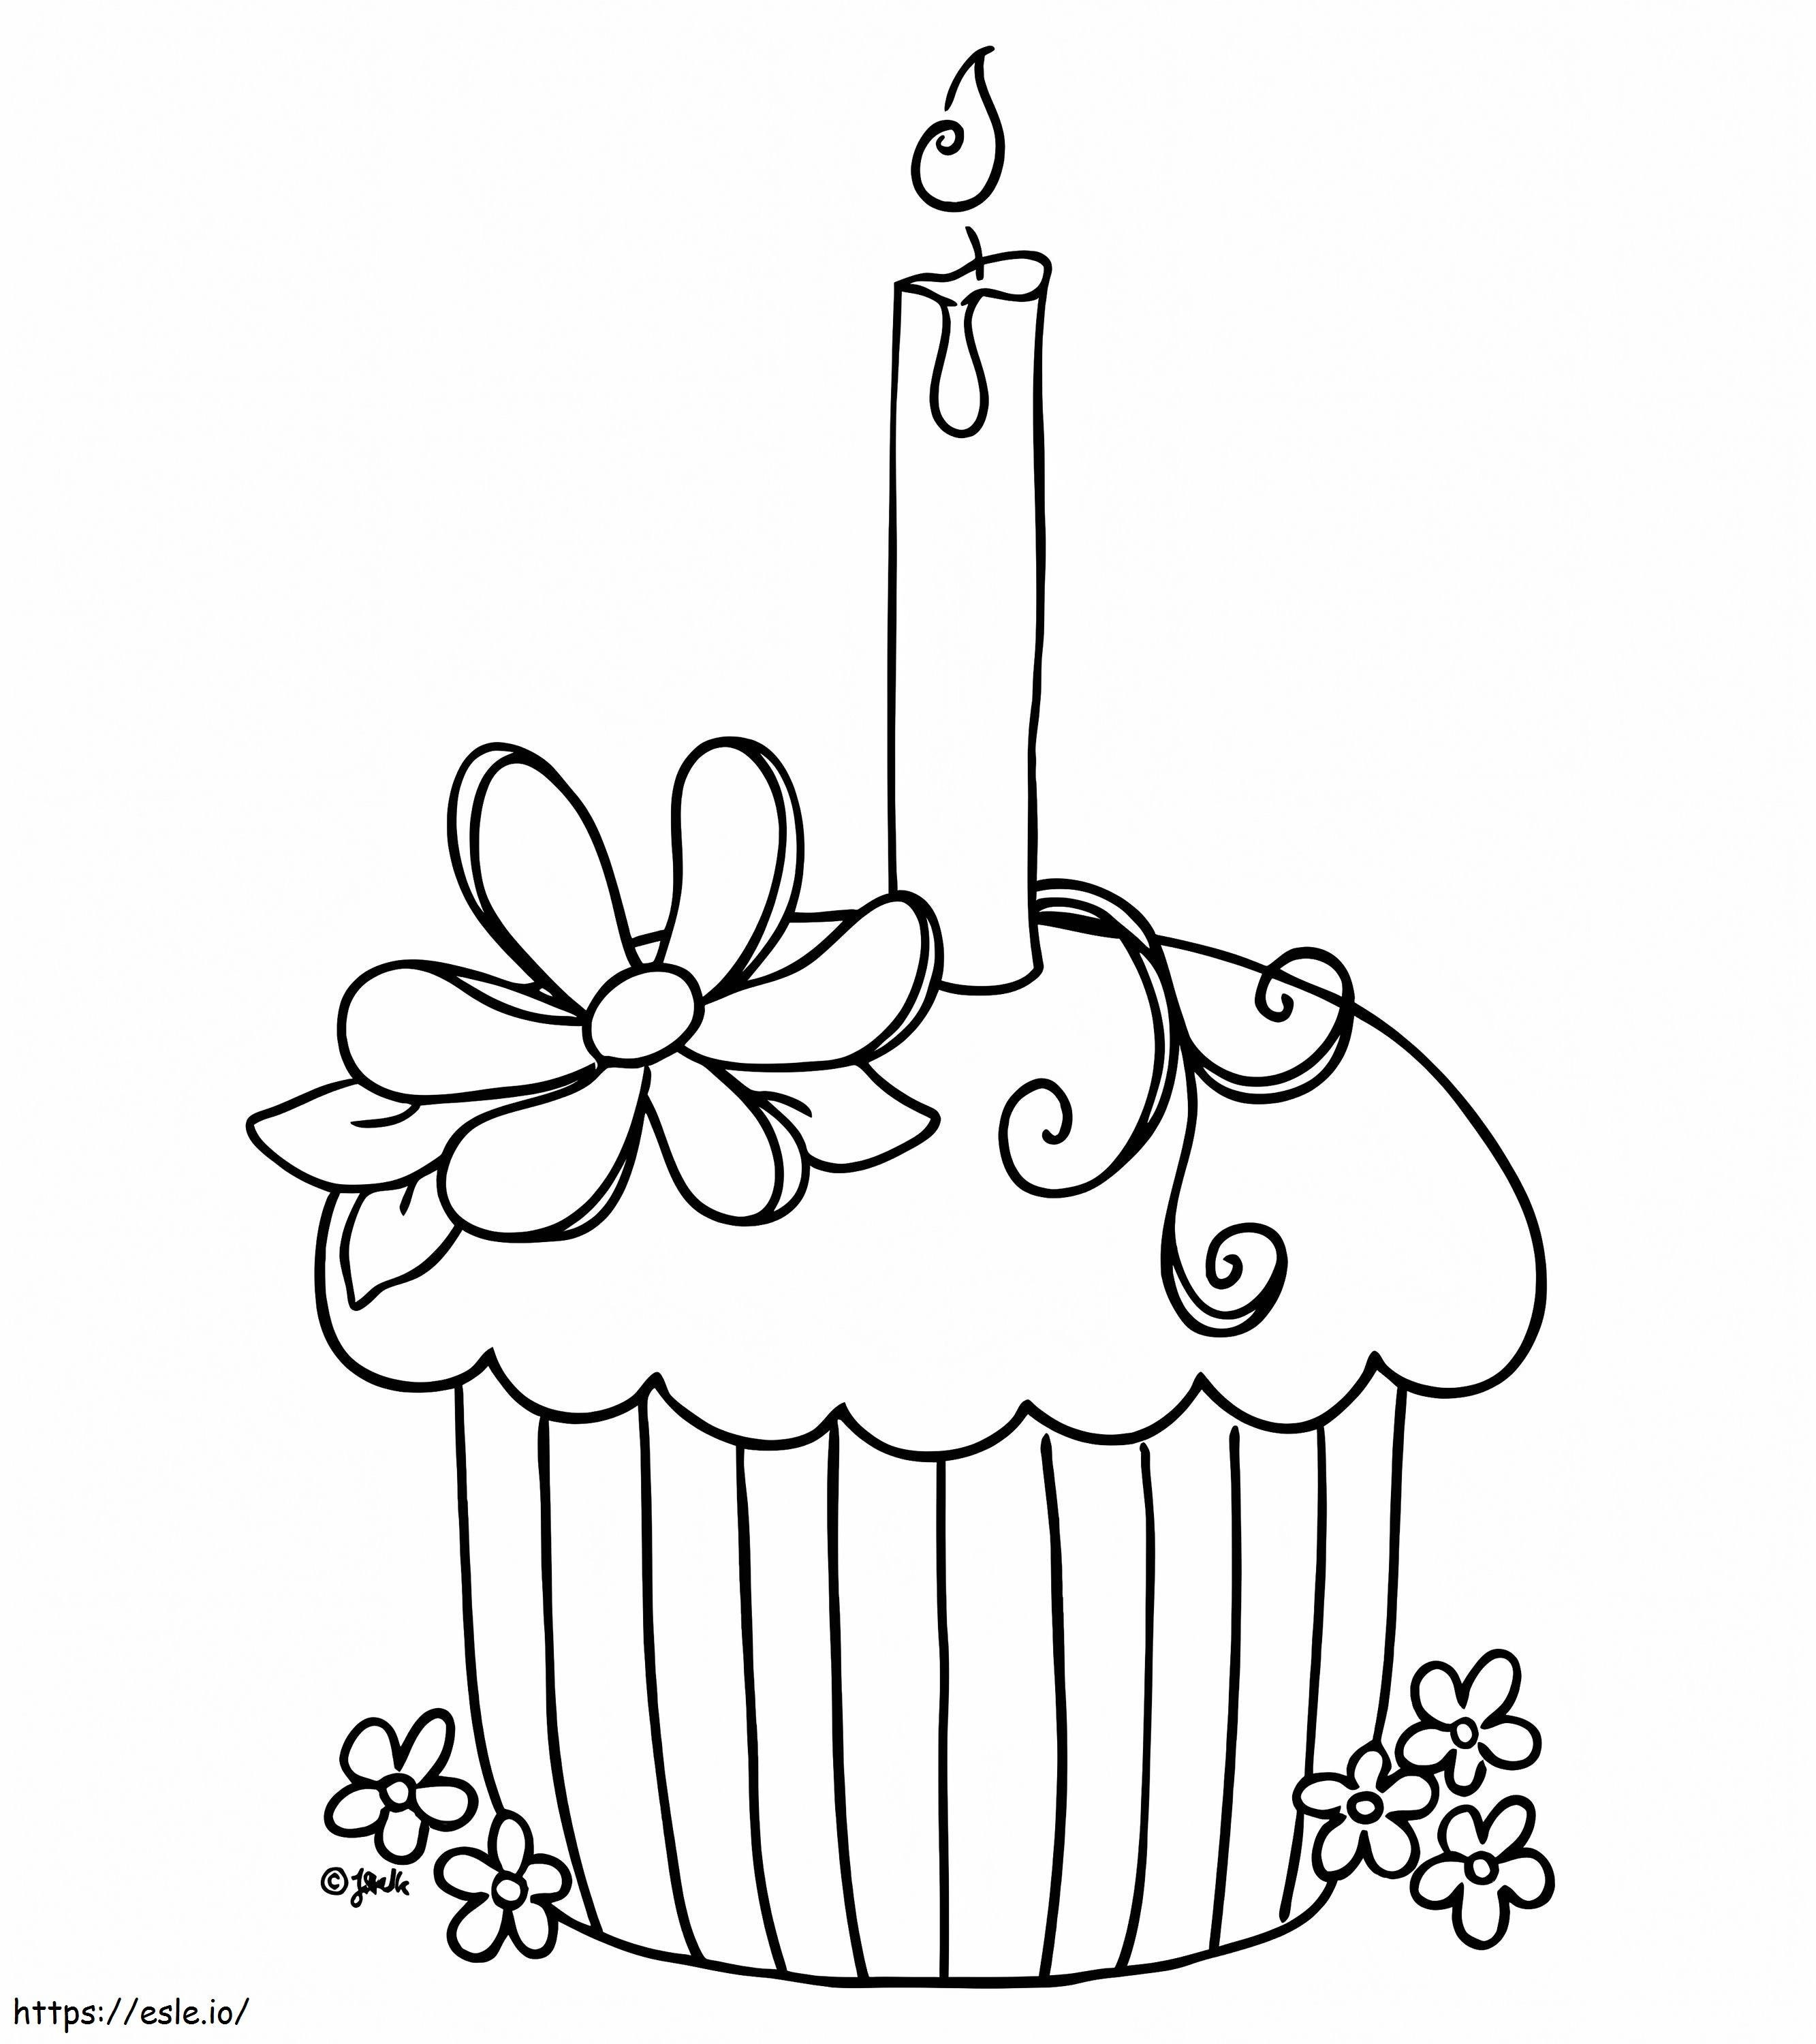 The Candle In The Cupcake coloring page